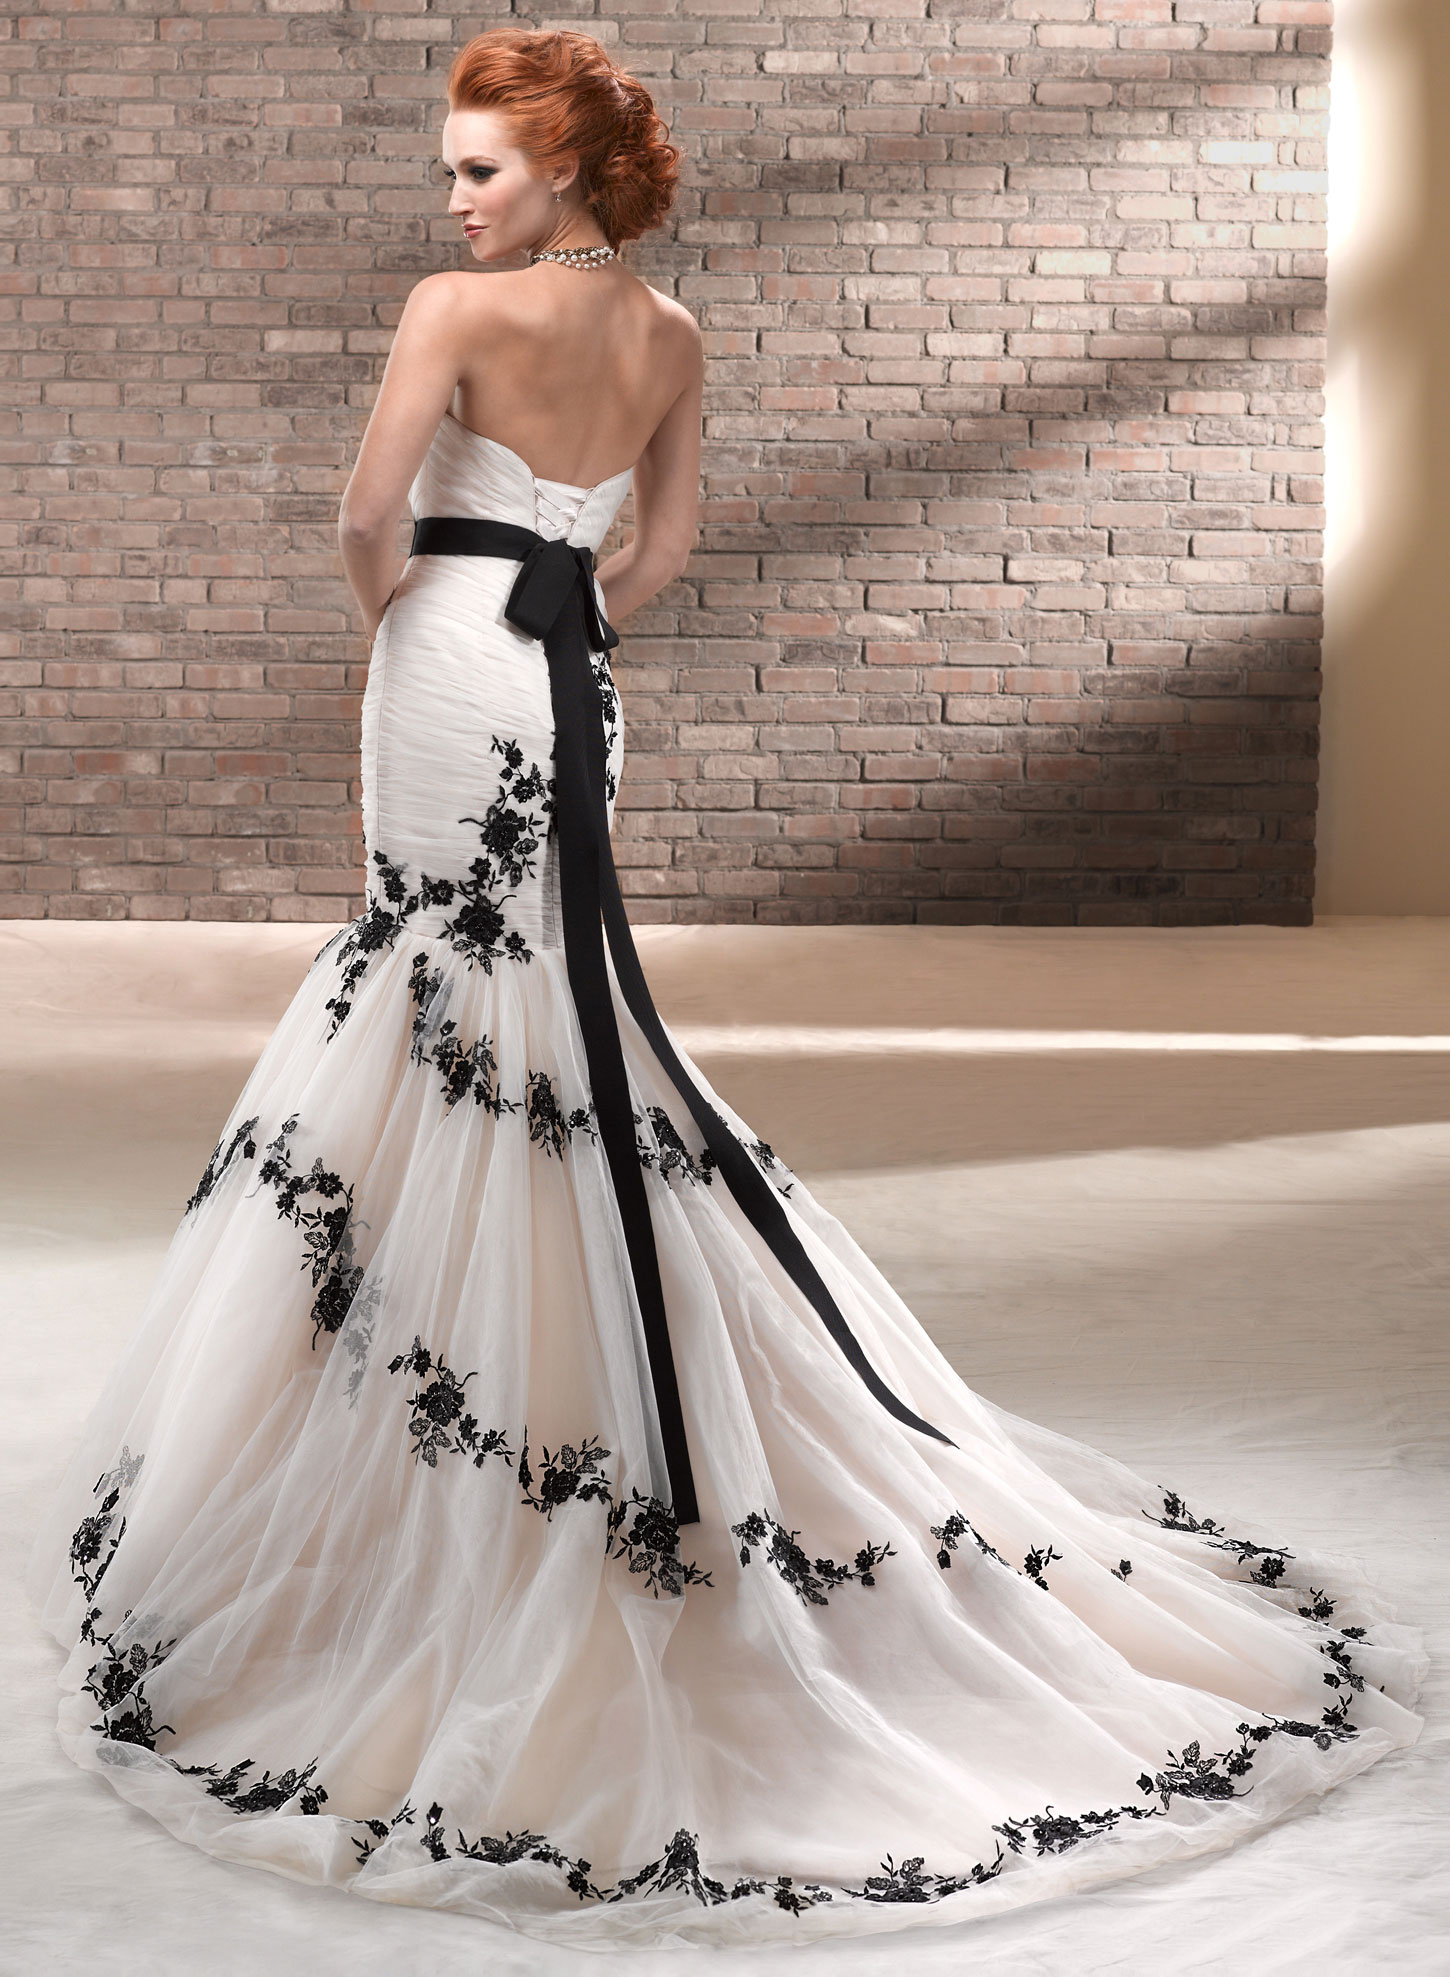 Maggie Sottero's mission is to make dreams a reality for every Maggie Sottero bride by delivering innovative designs, superior quality and best-in-class service.